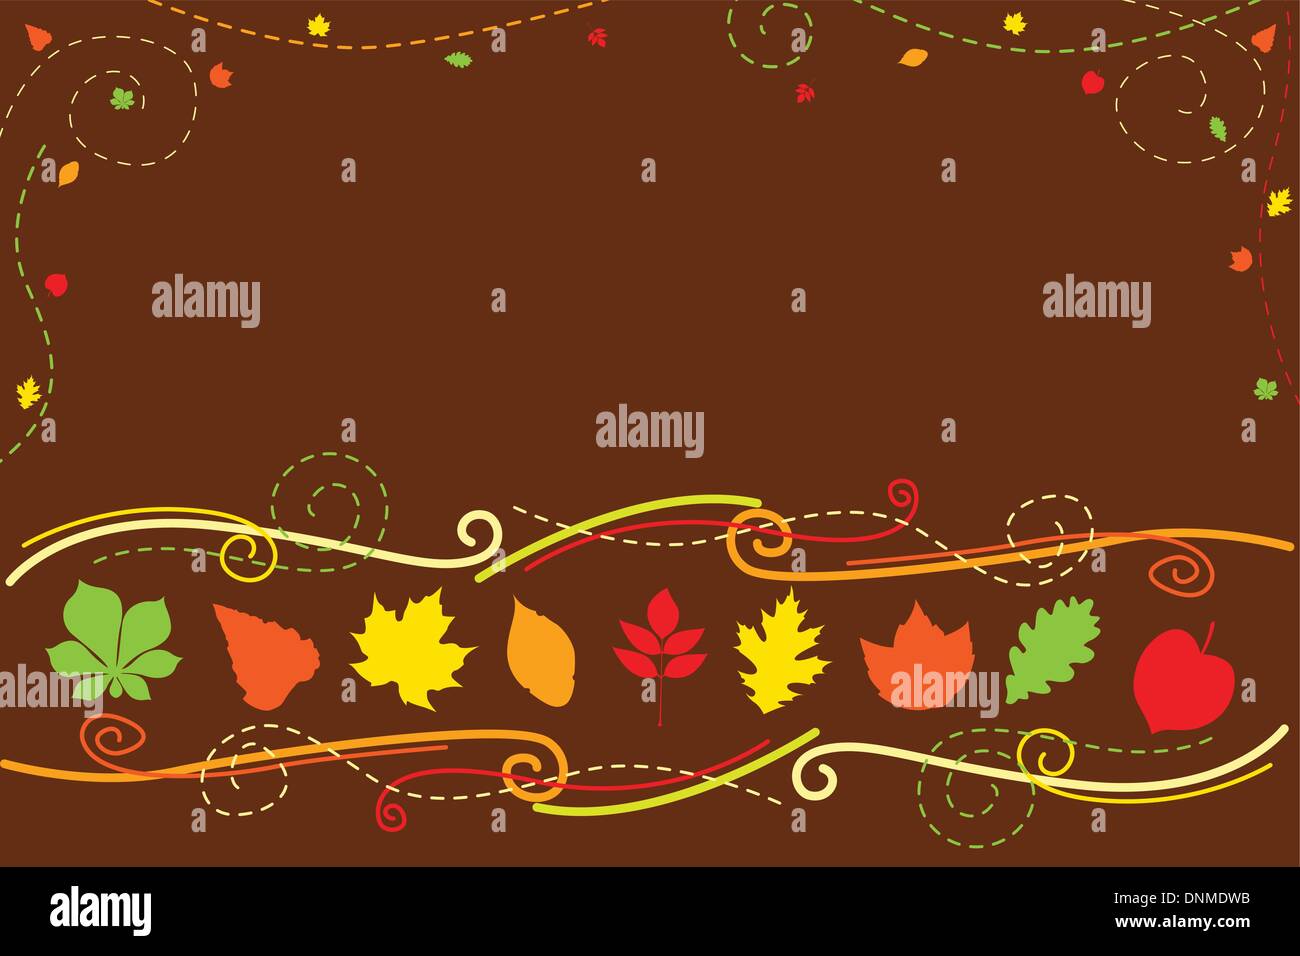 A vector illustration of autumn background Stock Vector